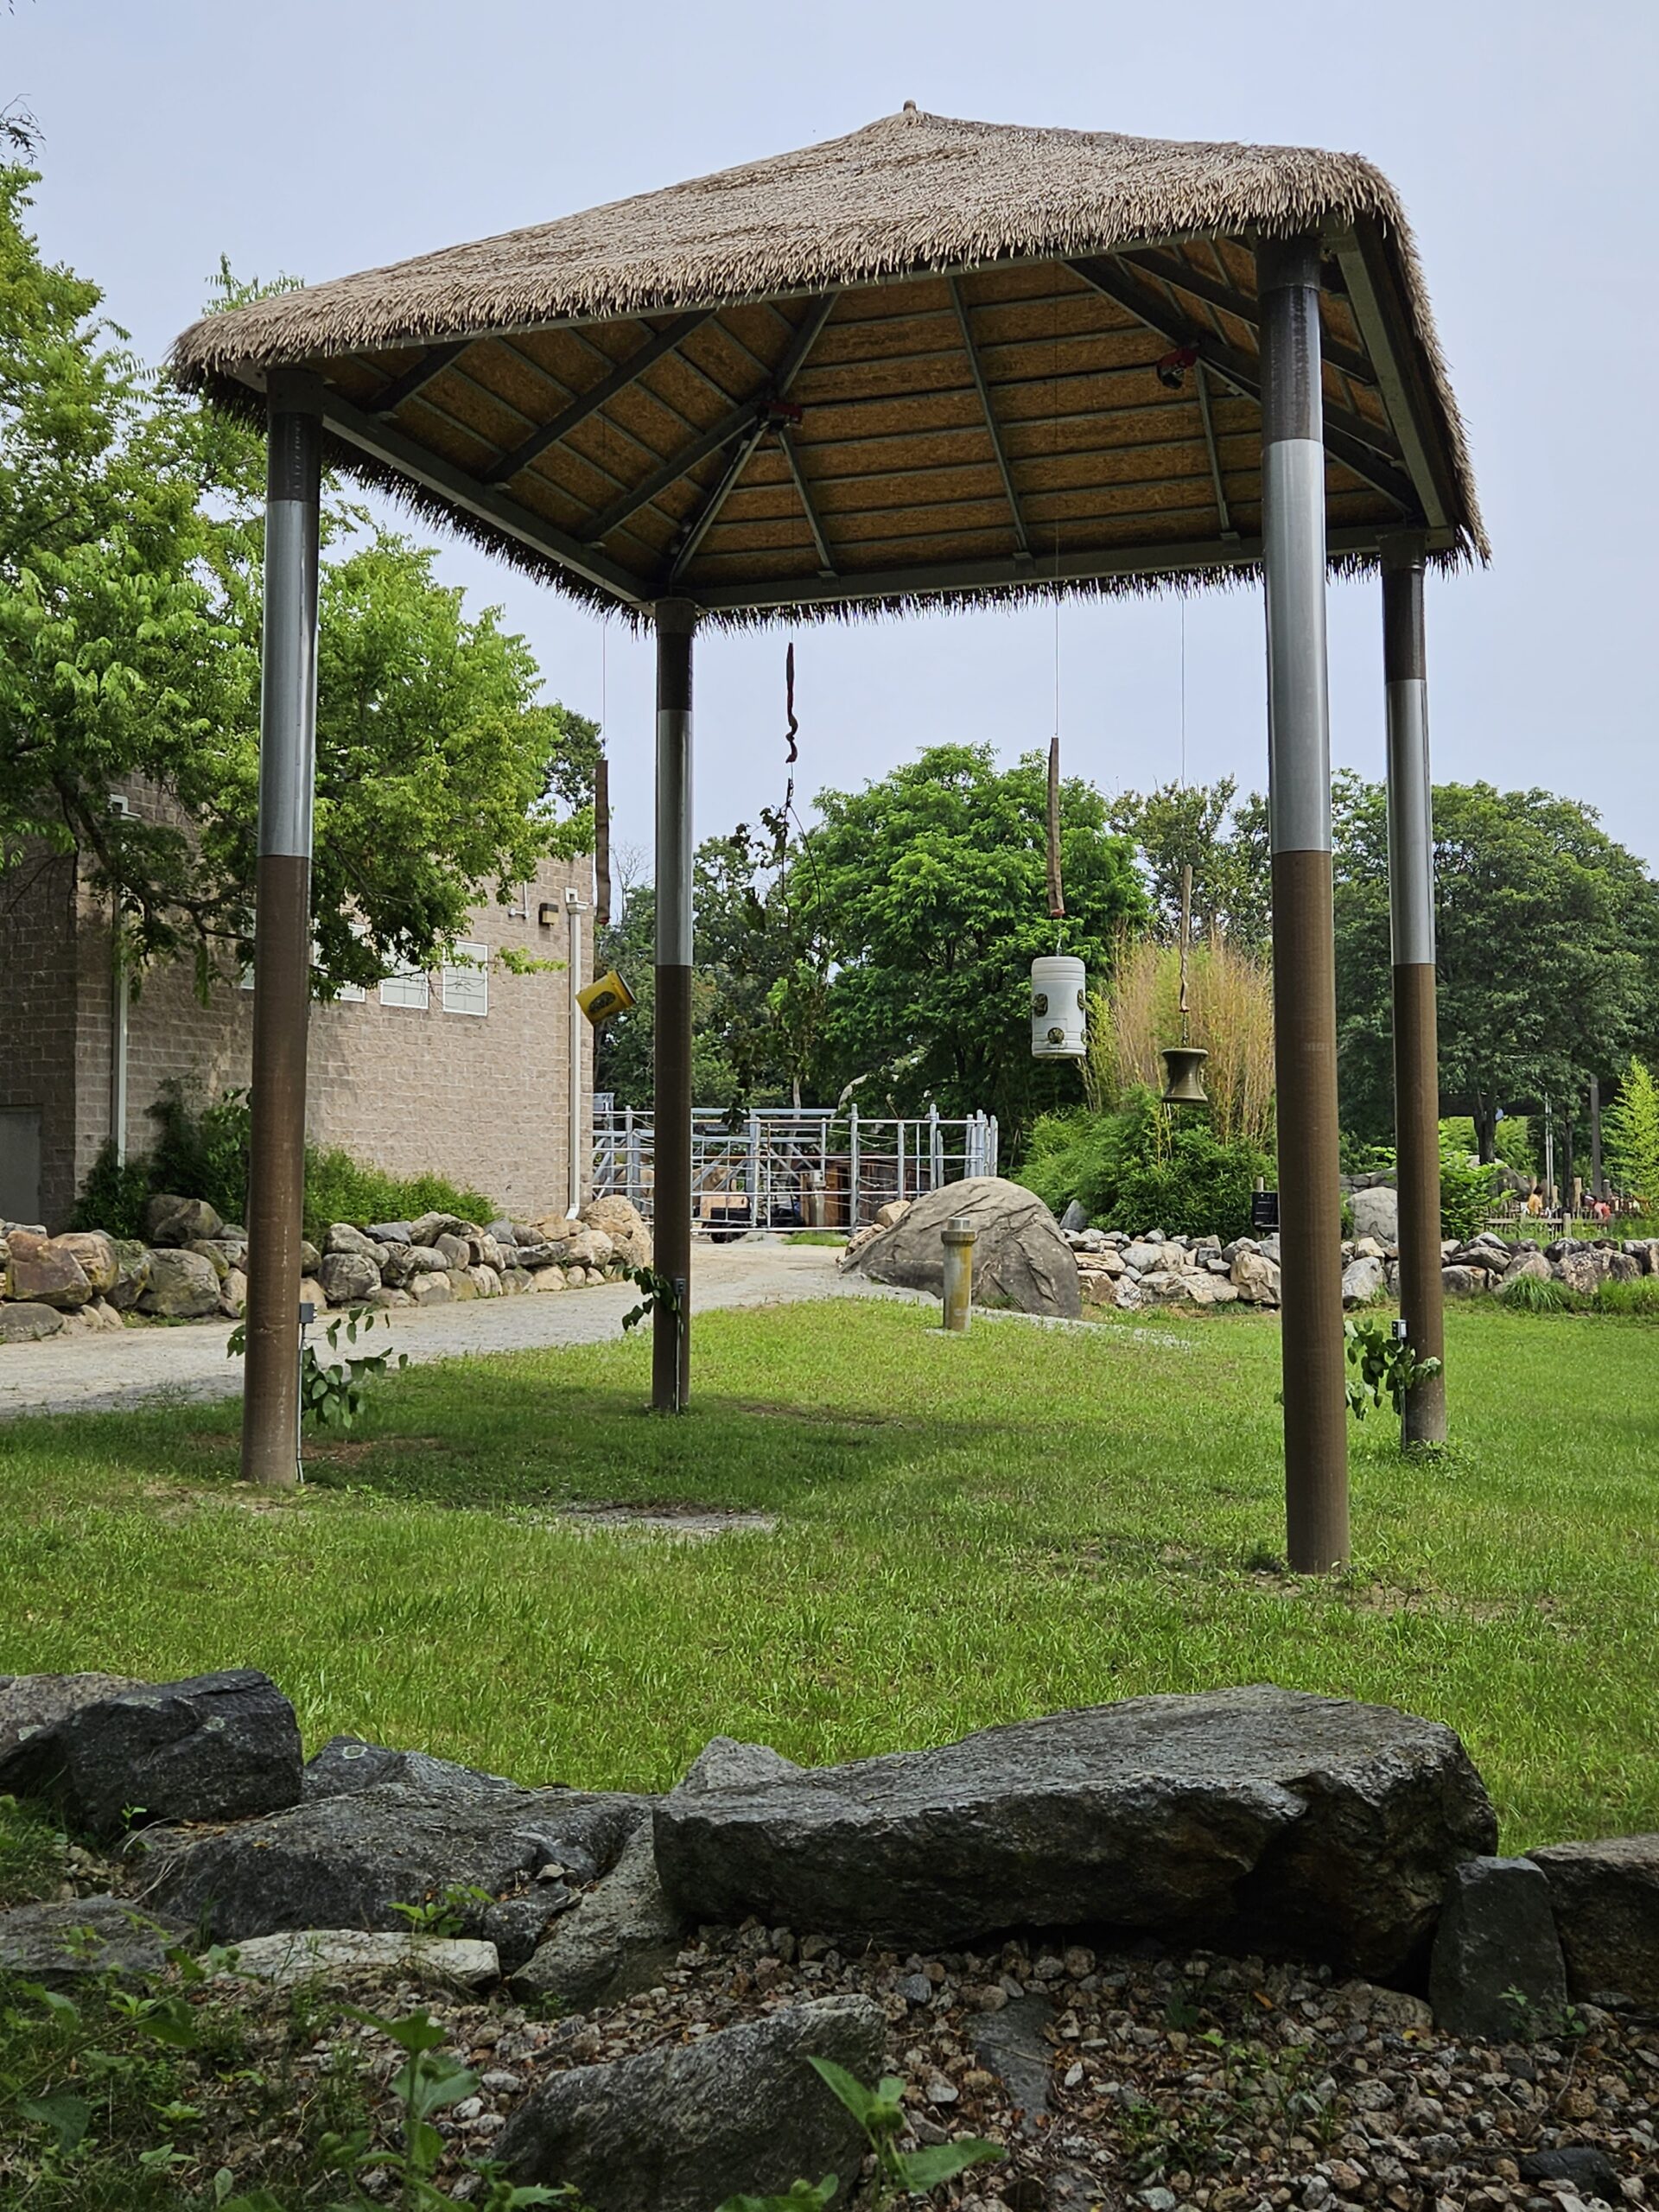 Giraffe Shade Structure at Roger Williams Park Zoo in Rhode Island